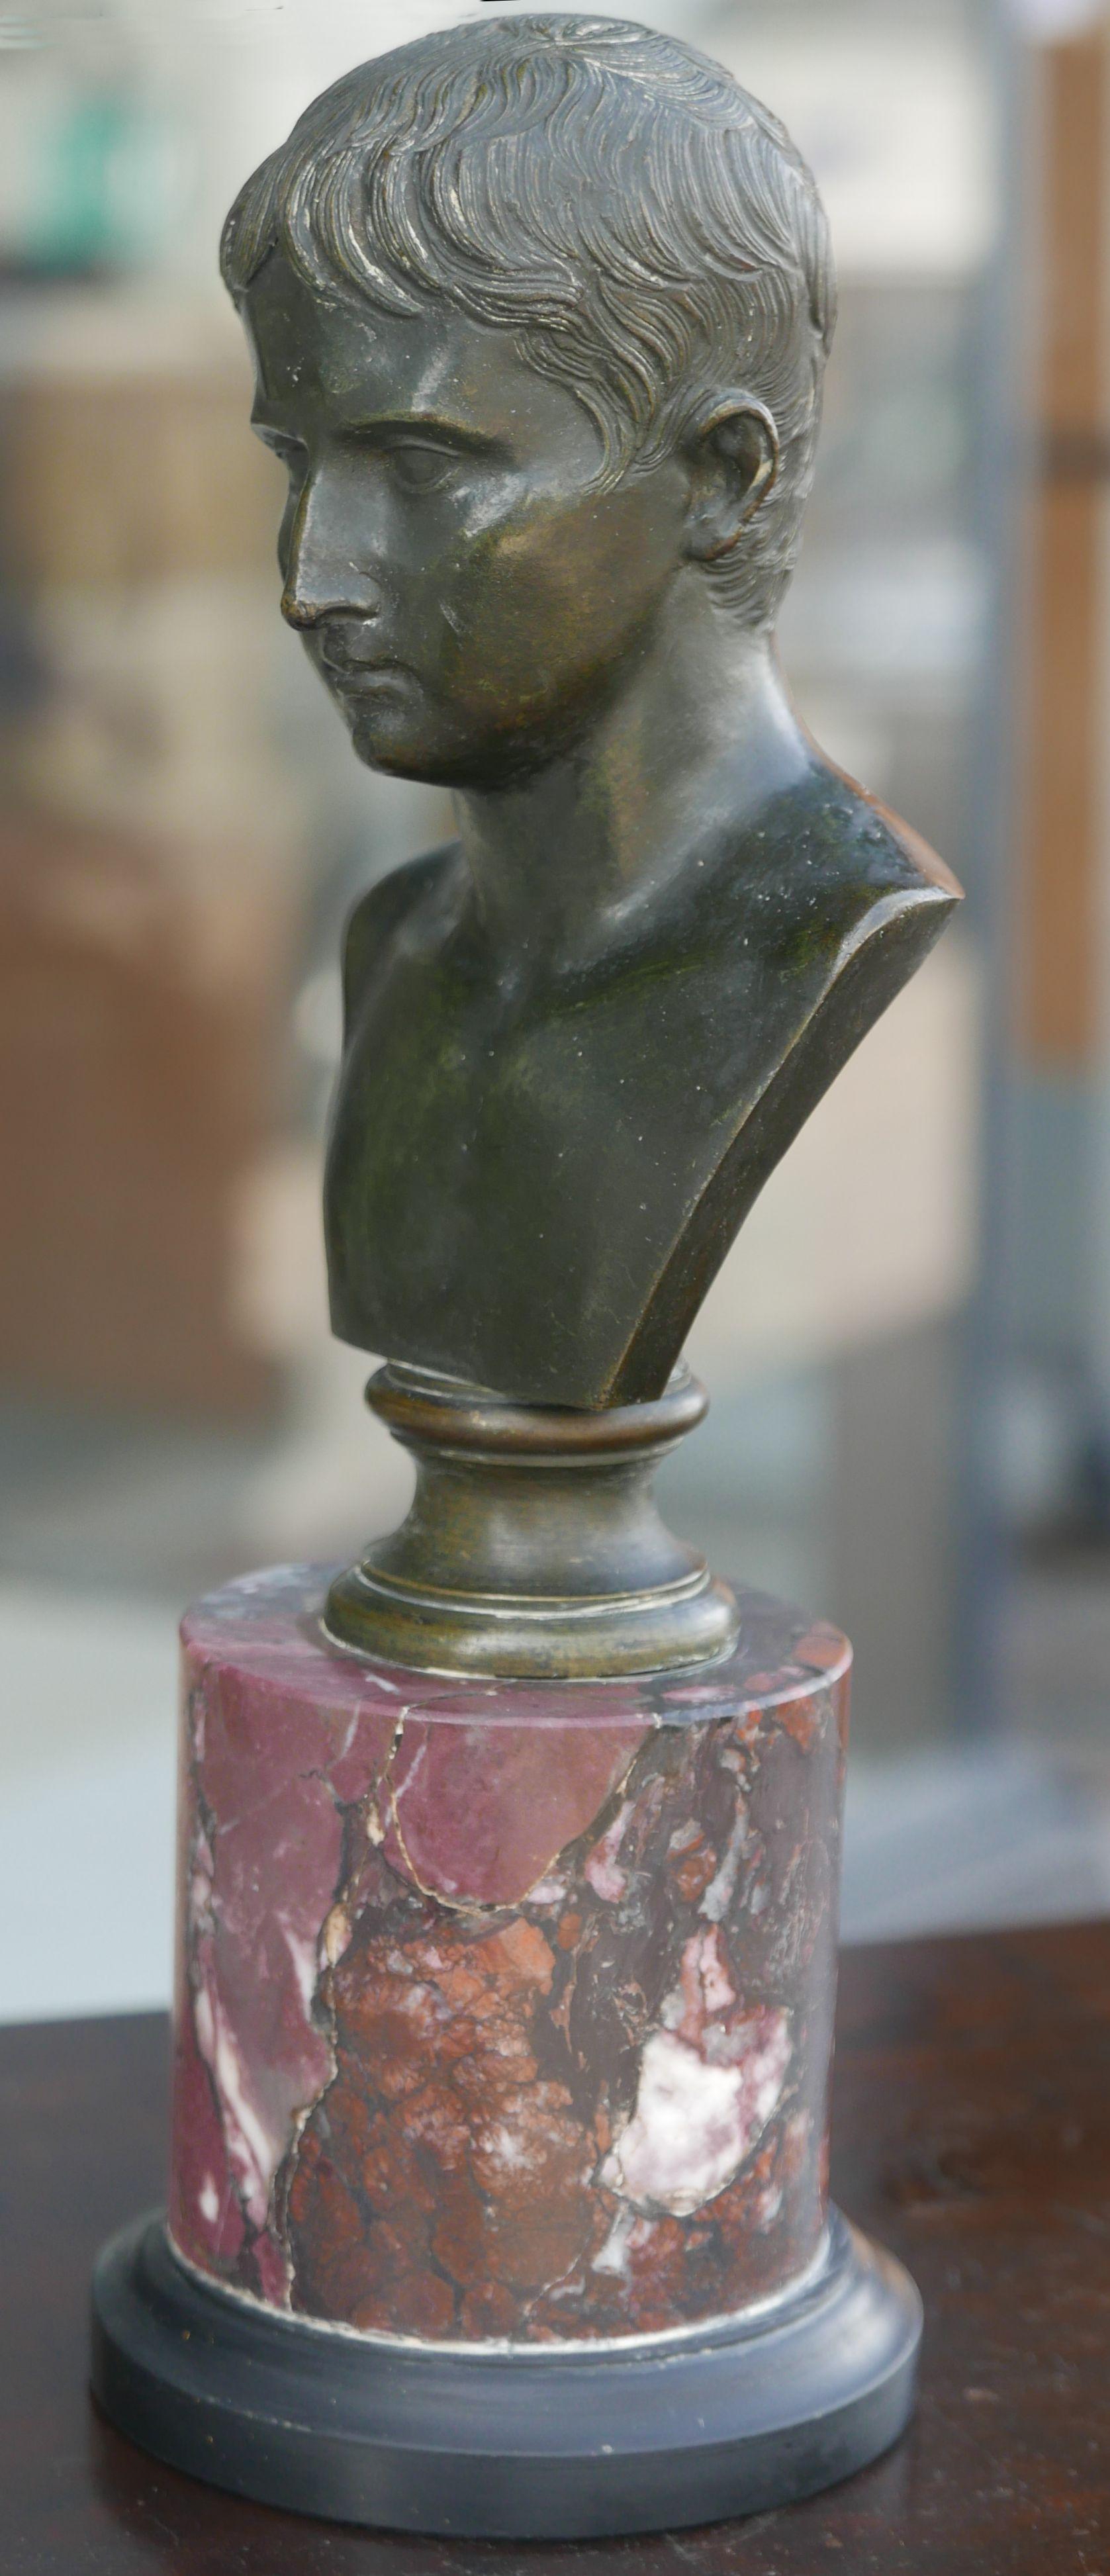 Nicely detailed Bronze bust of Caesar with terrific age acquired patina made in Italy during the late 19th century during the Grand Tour.